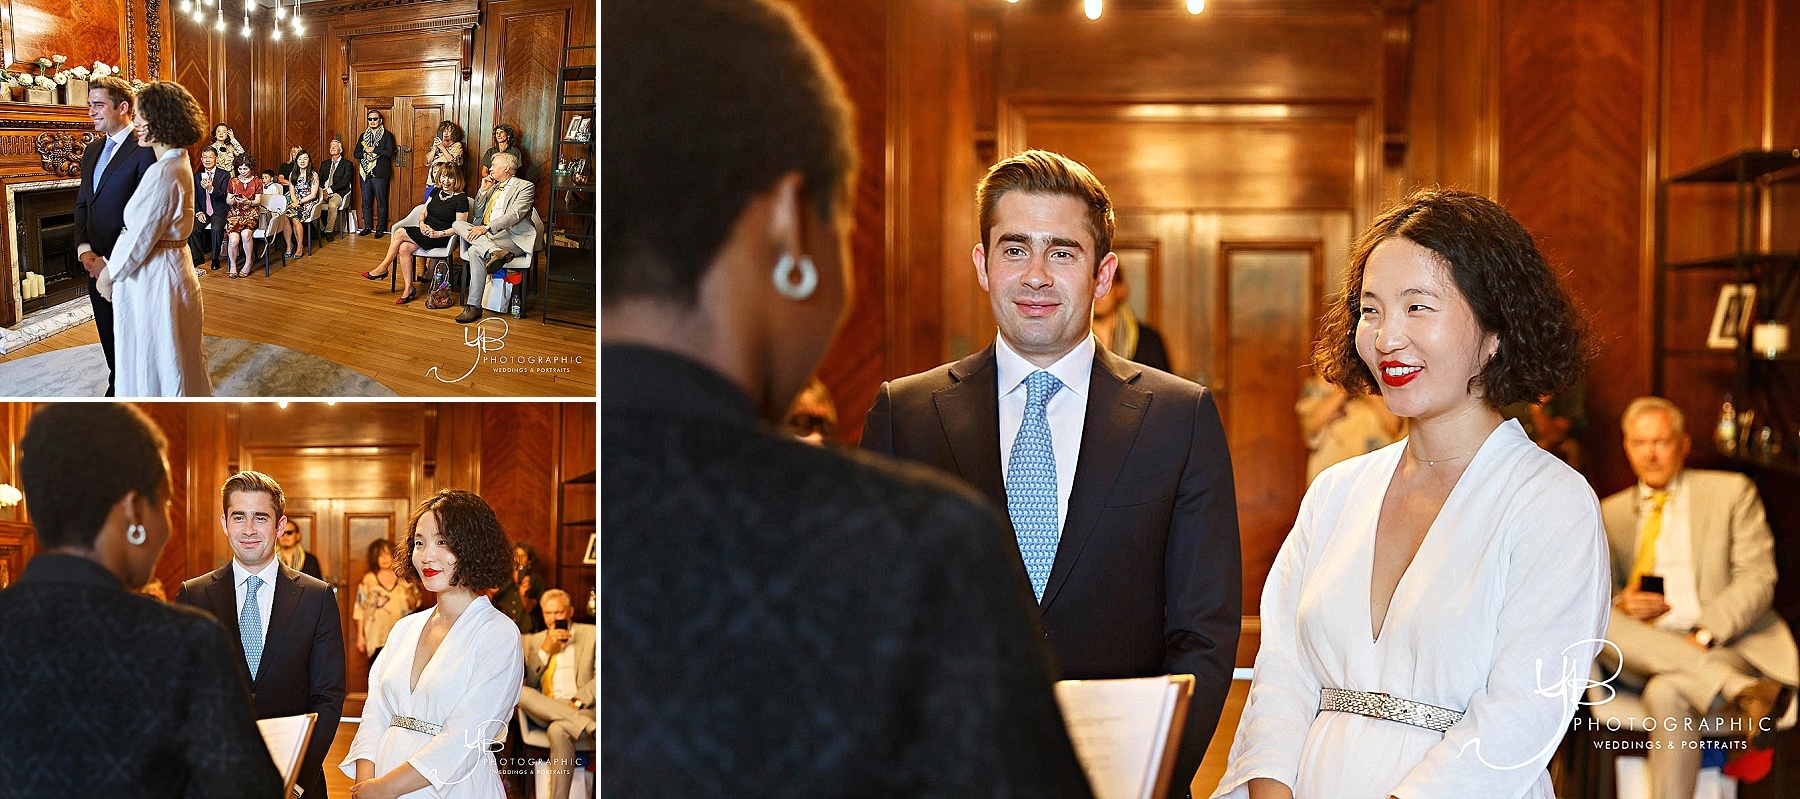 Family and friends witness the civil marriage ceremony of Janie and Jonathan in the wood-panelled Marylebone Room 